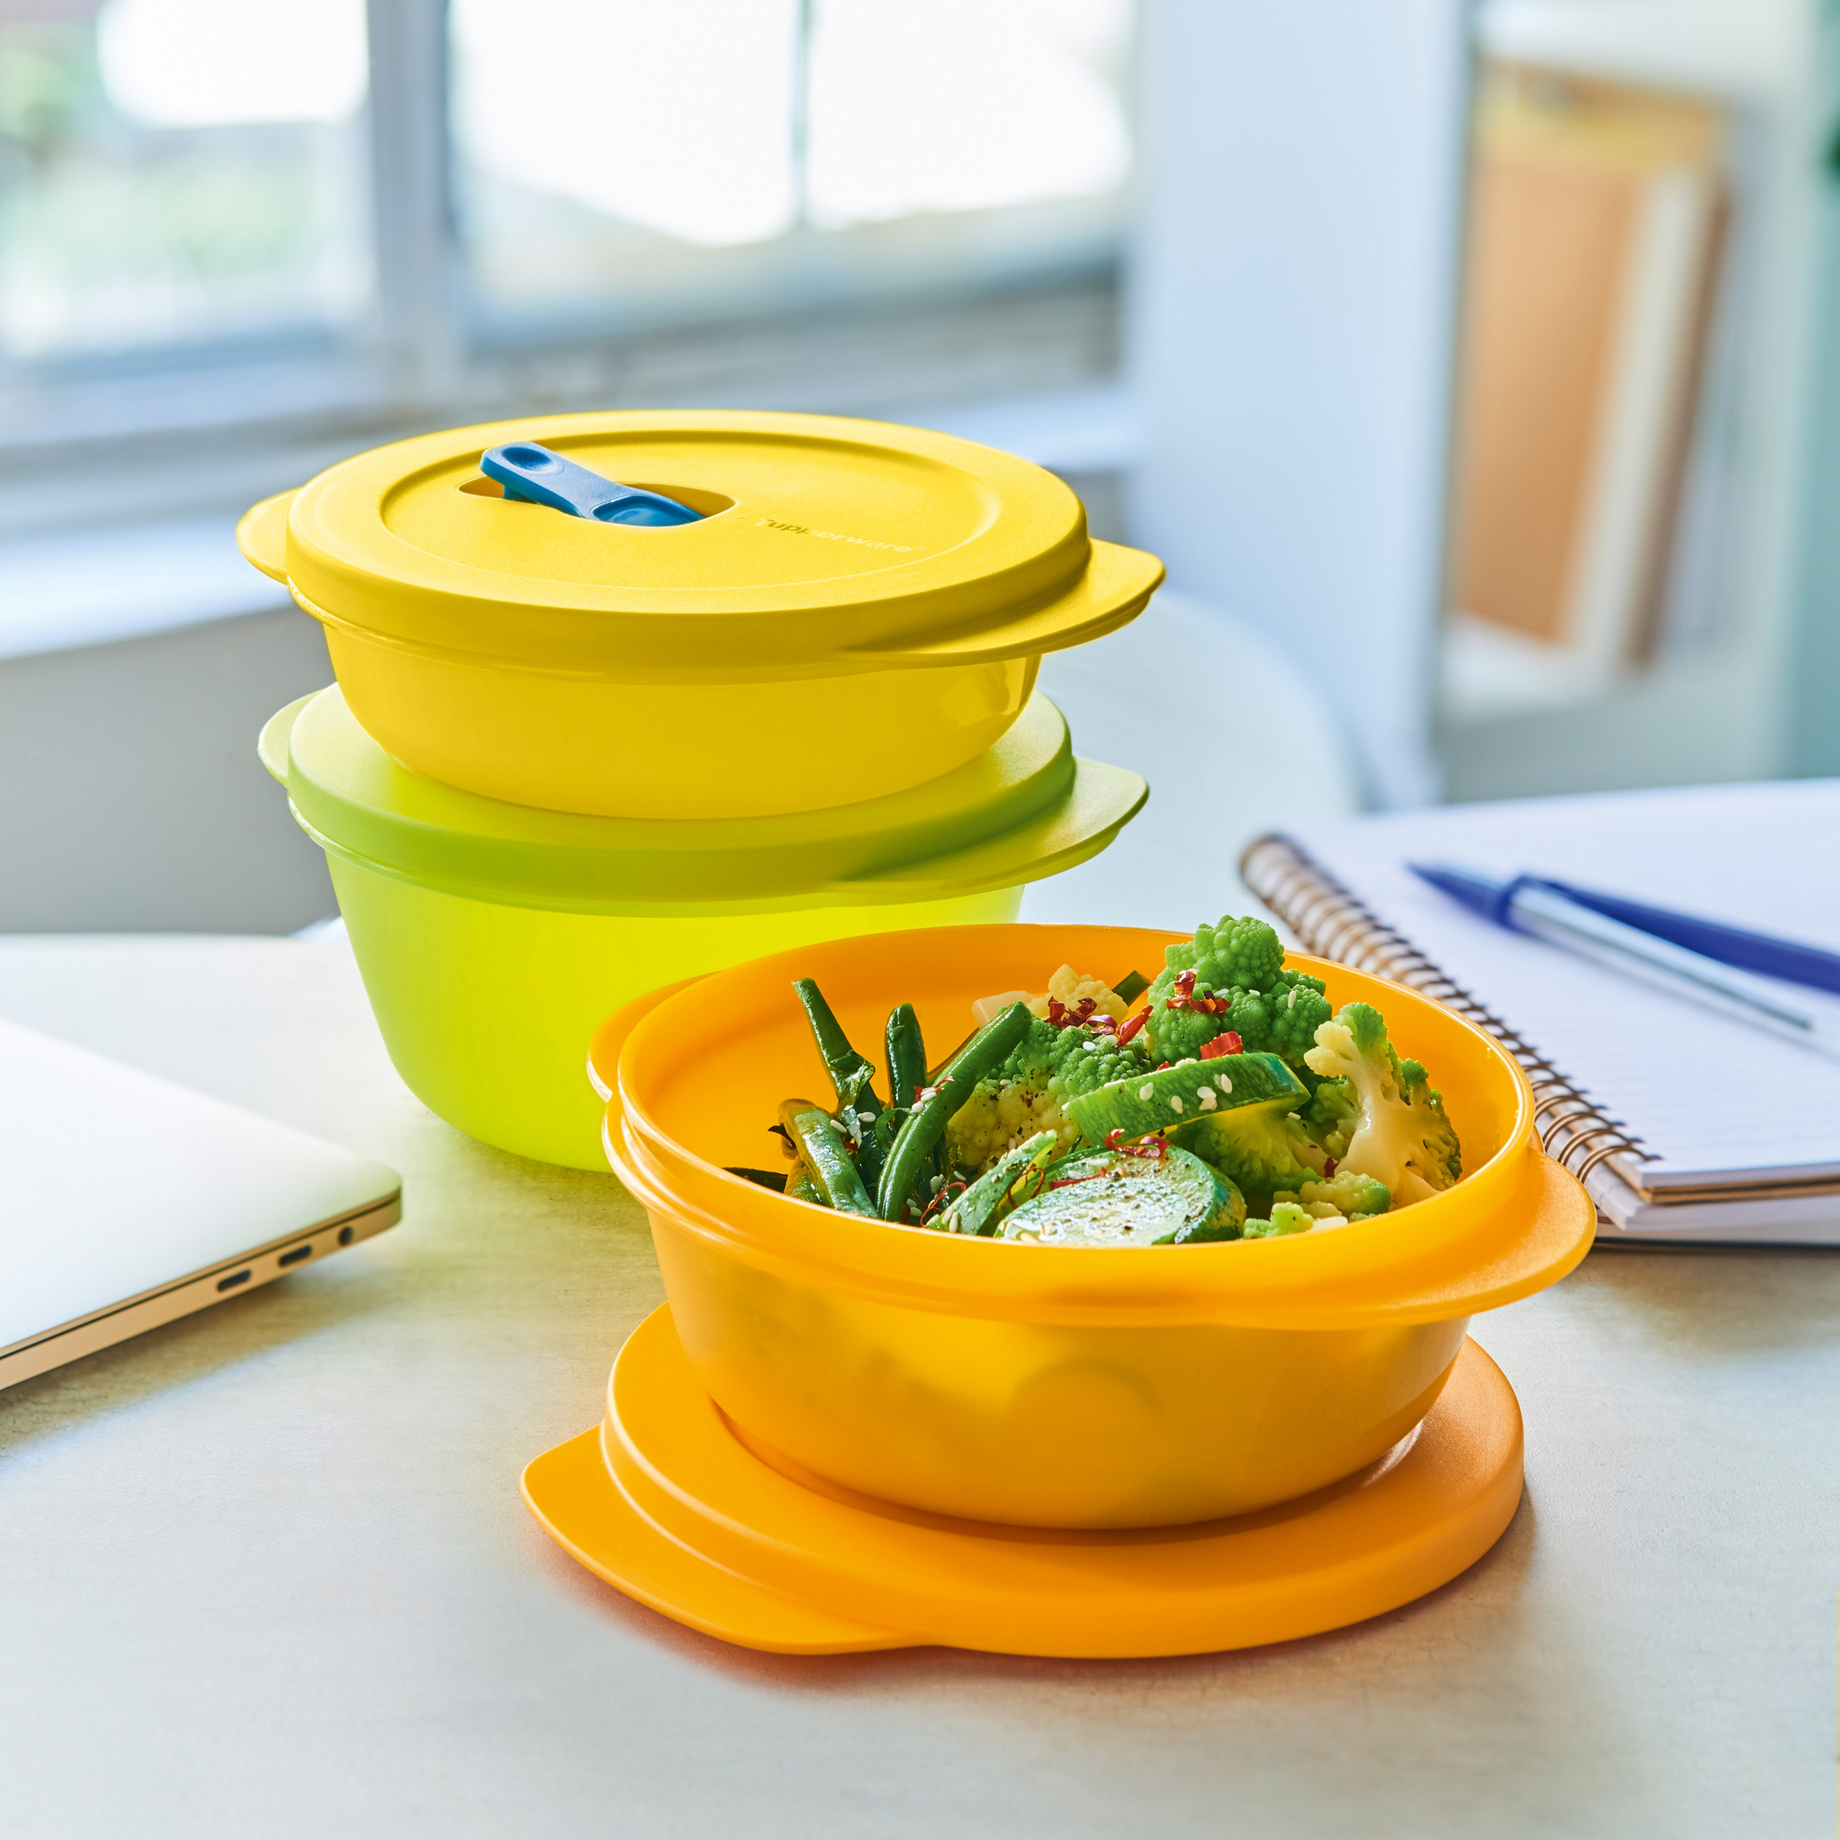 https://appng.tupperware.eu/service/appng/tupperware-products/rest/autoCrop/347300/1840/x